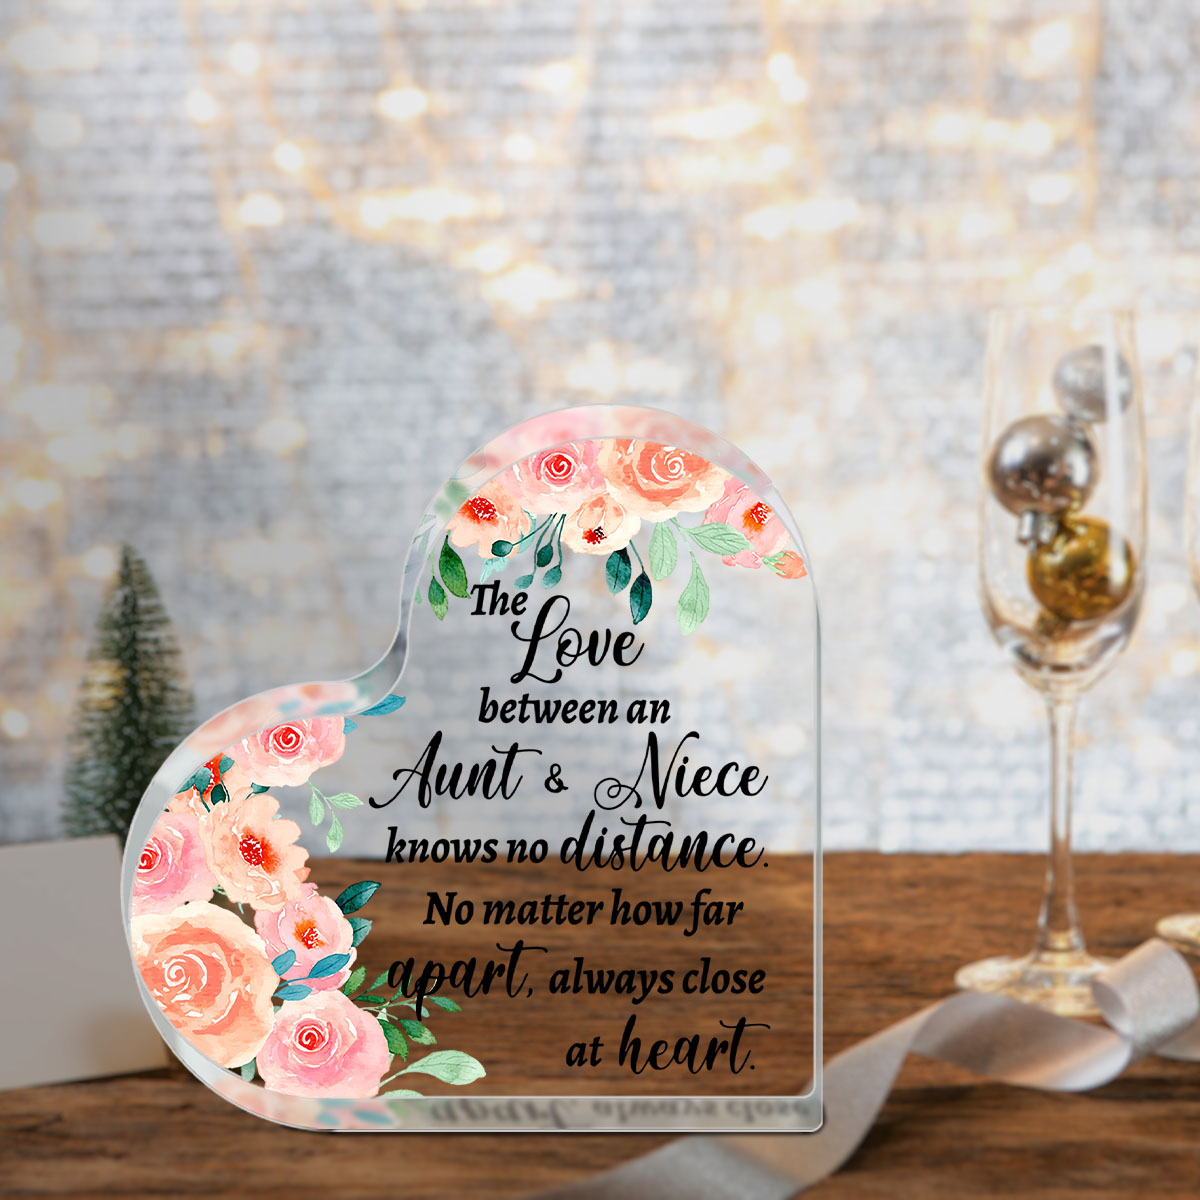 Valentines Day Gift For Aunt, Aunt Gift Frame {I'm Not Just An Aunt} B –  Dandelion Wishes